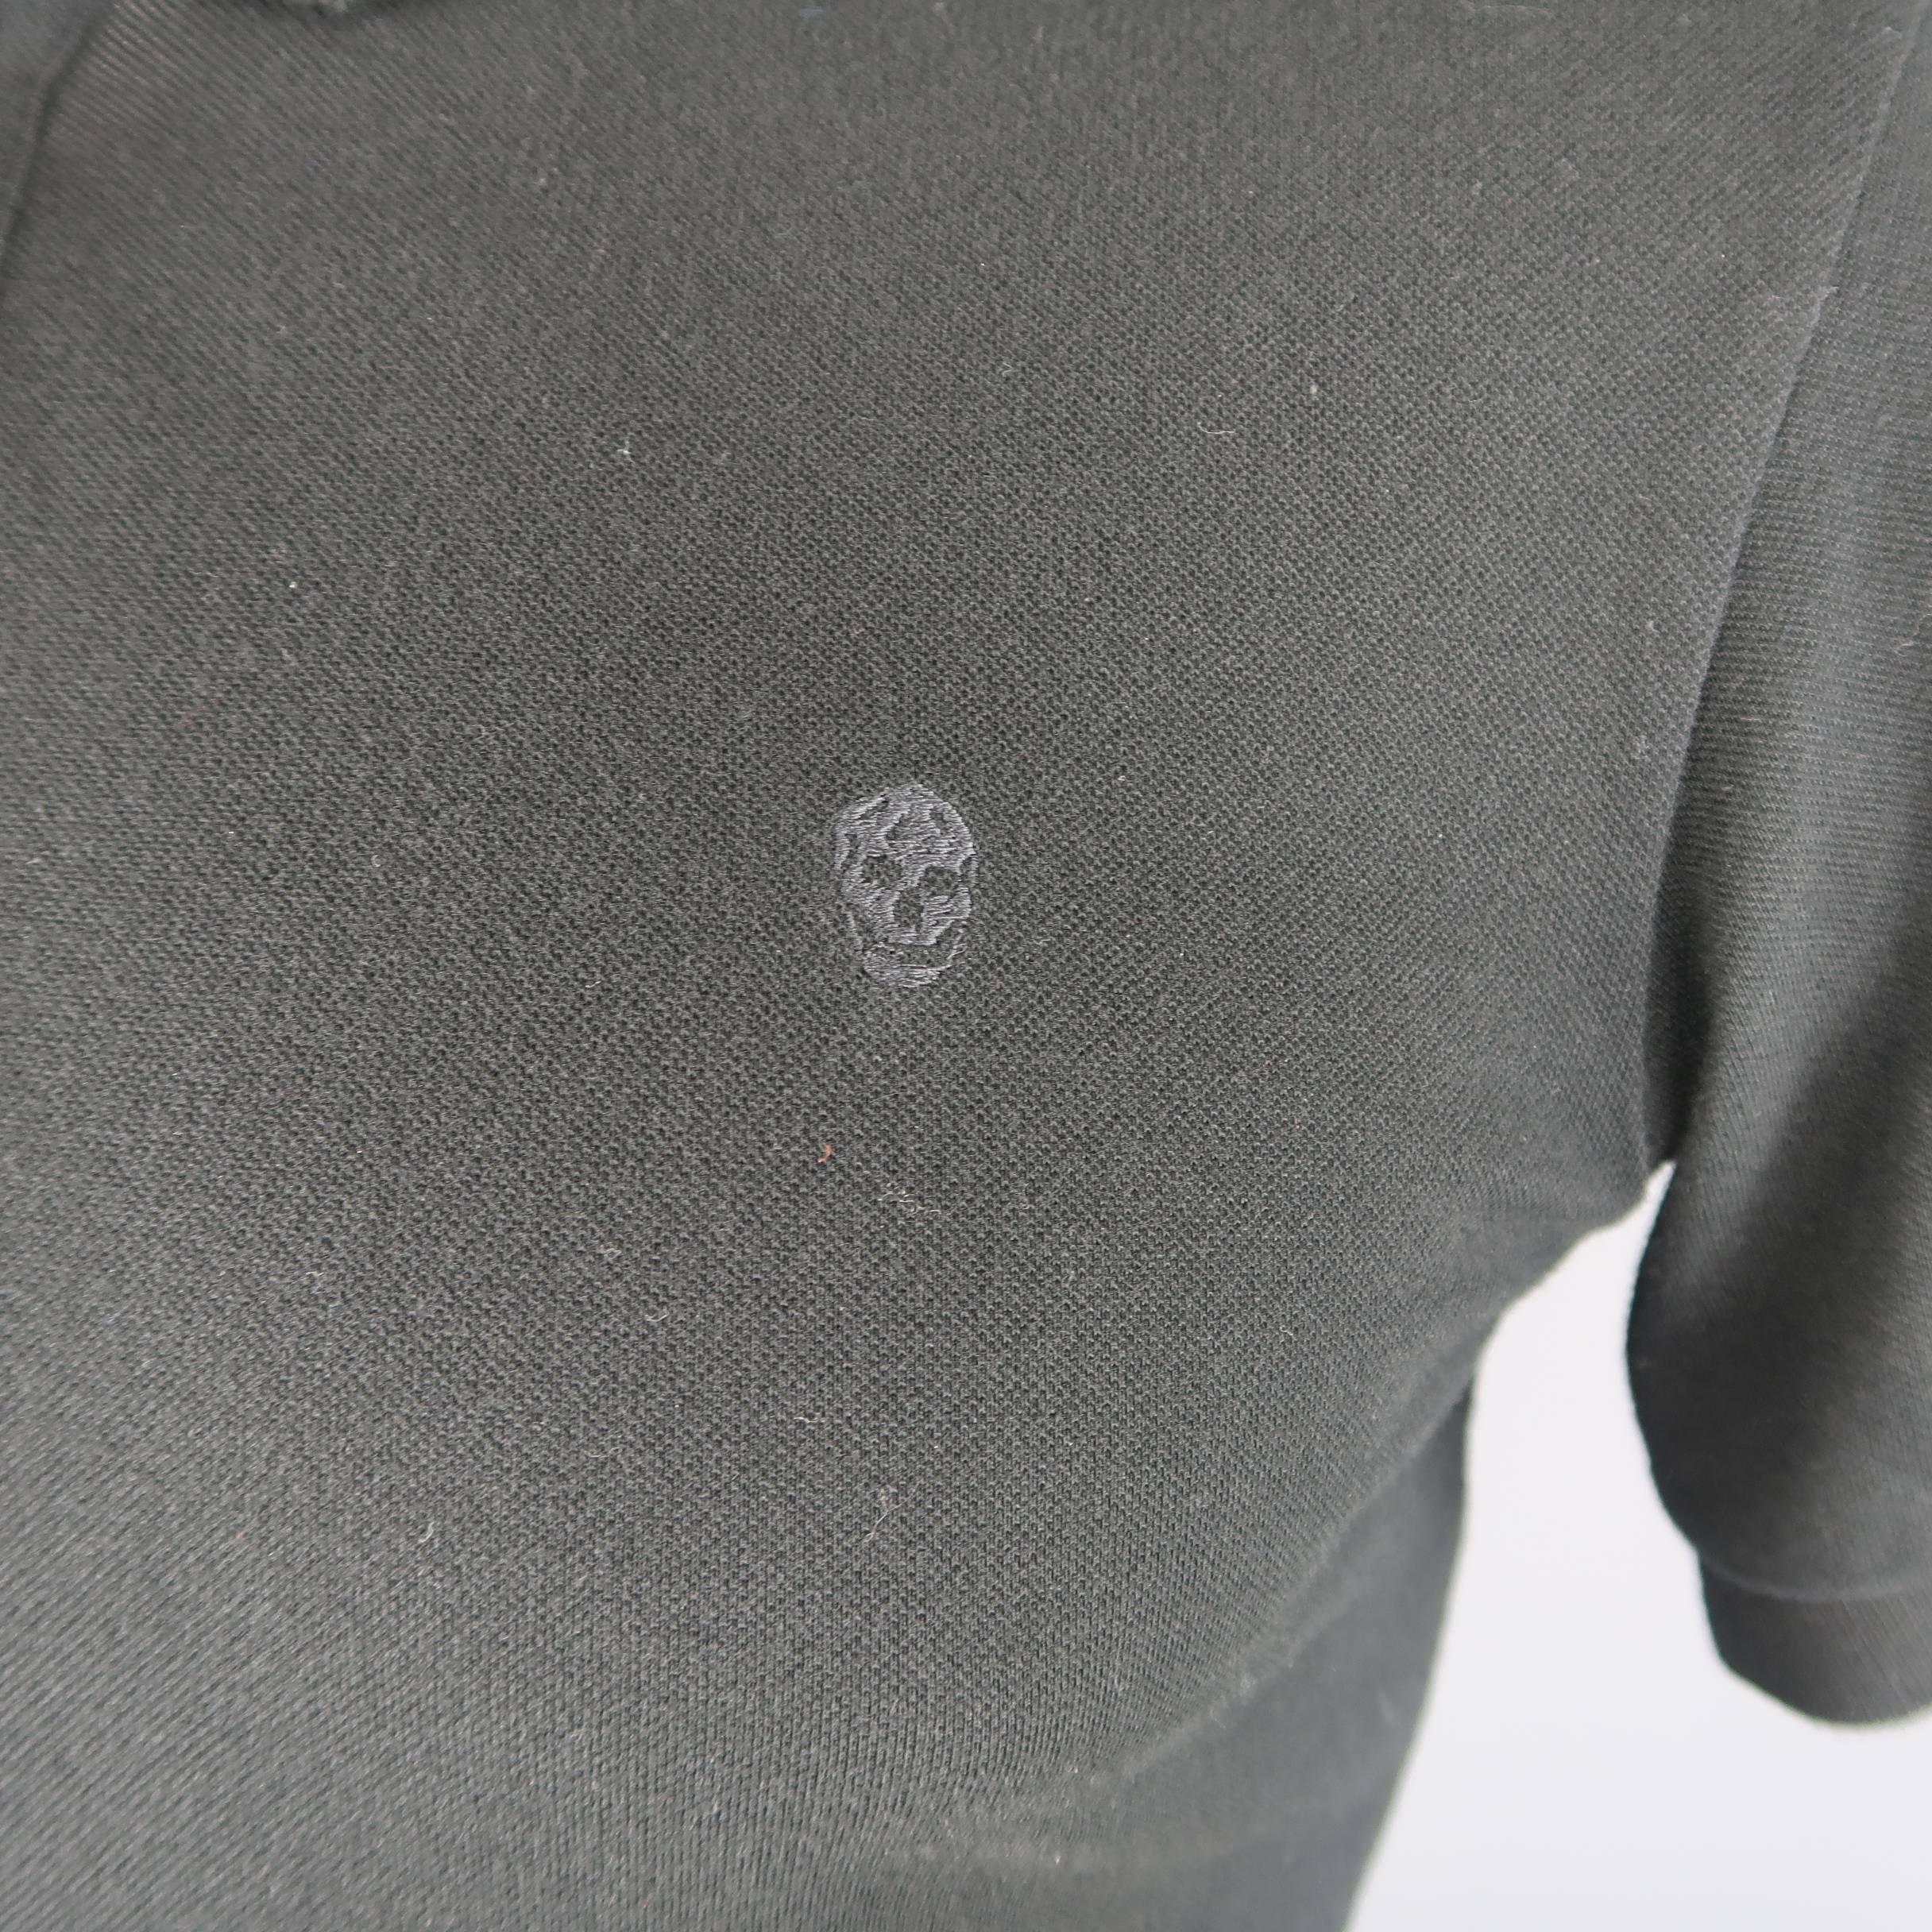 ALEXANDER MCQUEEN polo comes in black cotton pique with a skinny collar and embroidered skull emblem. Care tag removed. As-is.Made in Italy.
 
Good Pre-Owned Condition.
Marked: (no size)
 
Measurements:
 
Shoulder: 20 in.
Chest: 42 in.
Sleeve: 8